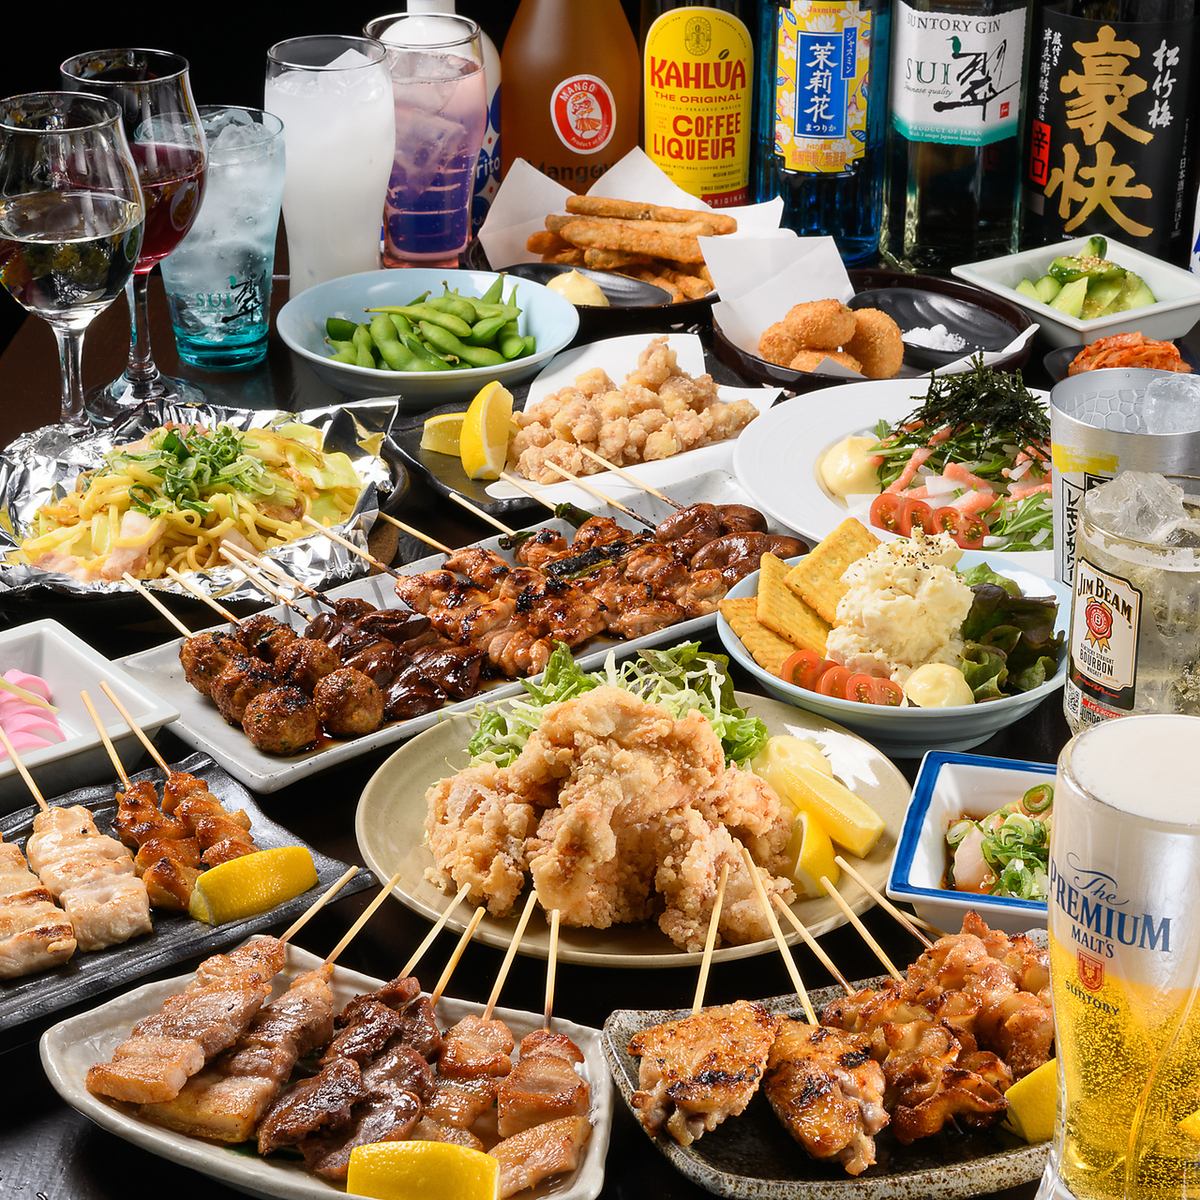 All-you-can-drink with 12 course meals for 3,000 yen!